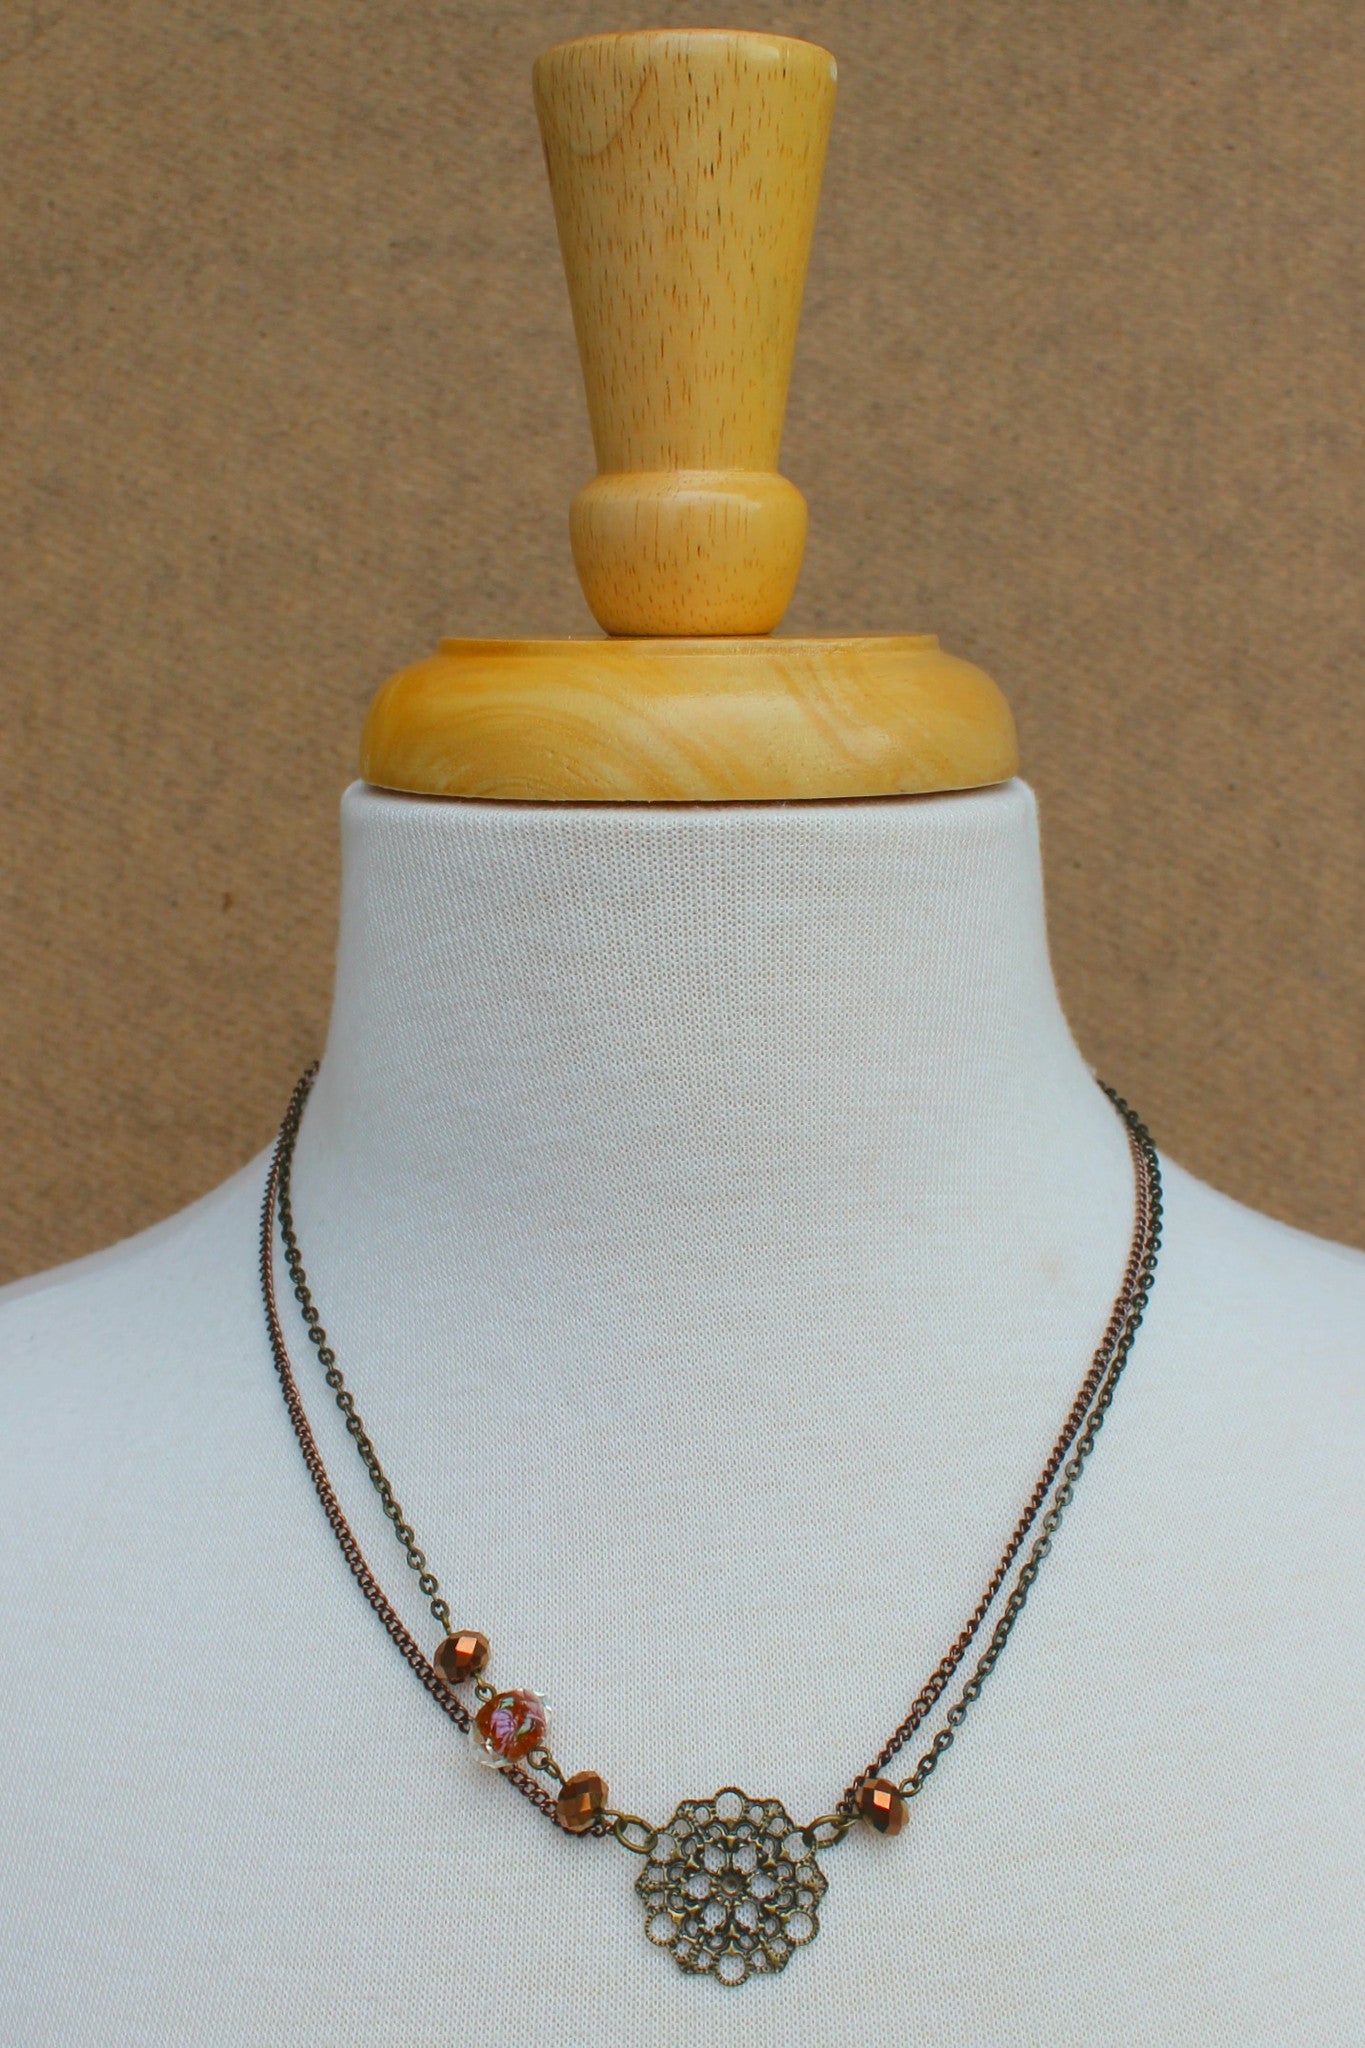 Dawna Lee Jewelry: Double Strand Necklace, Gold